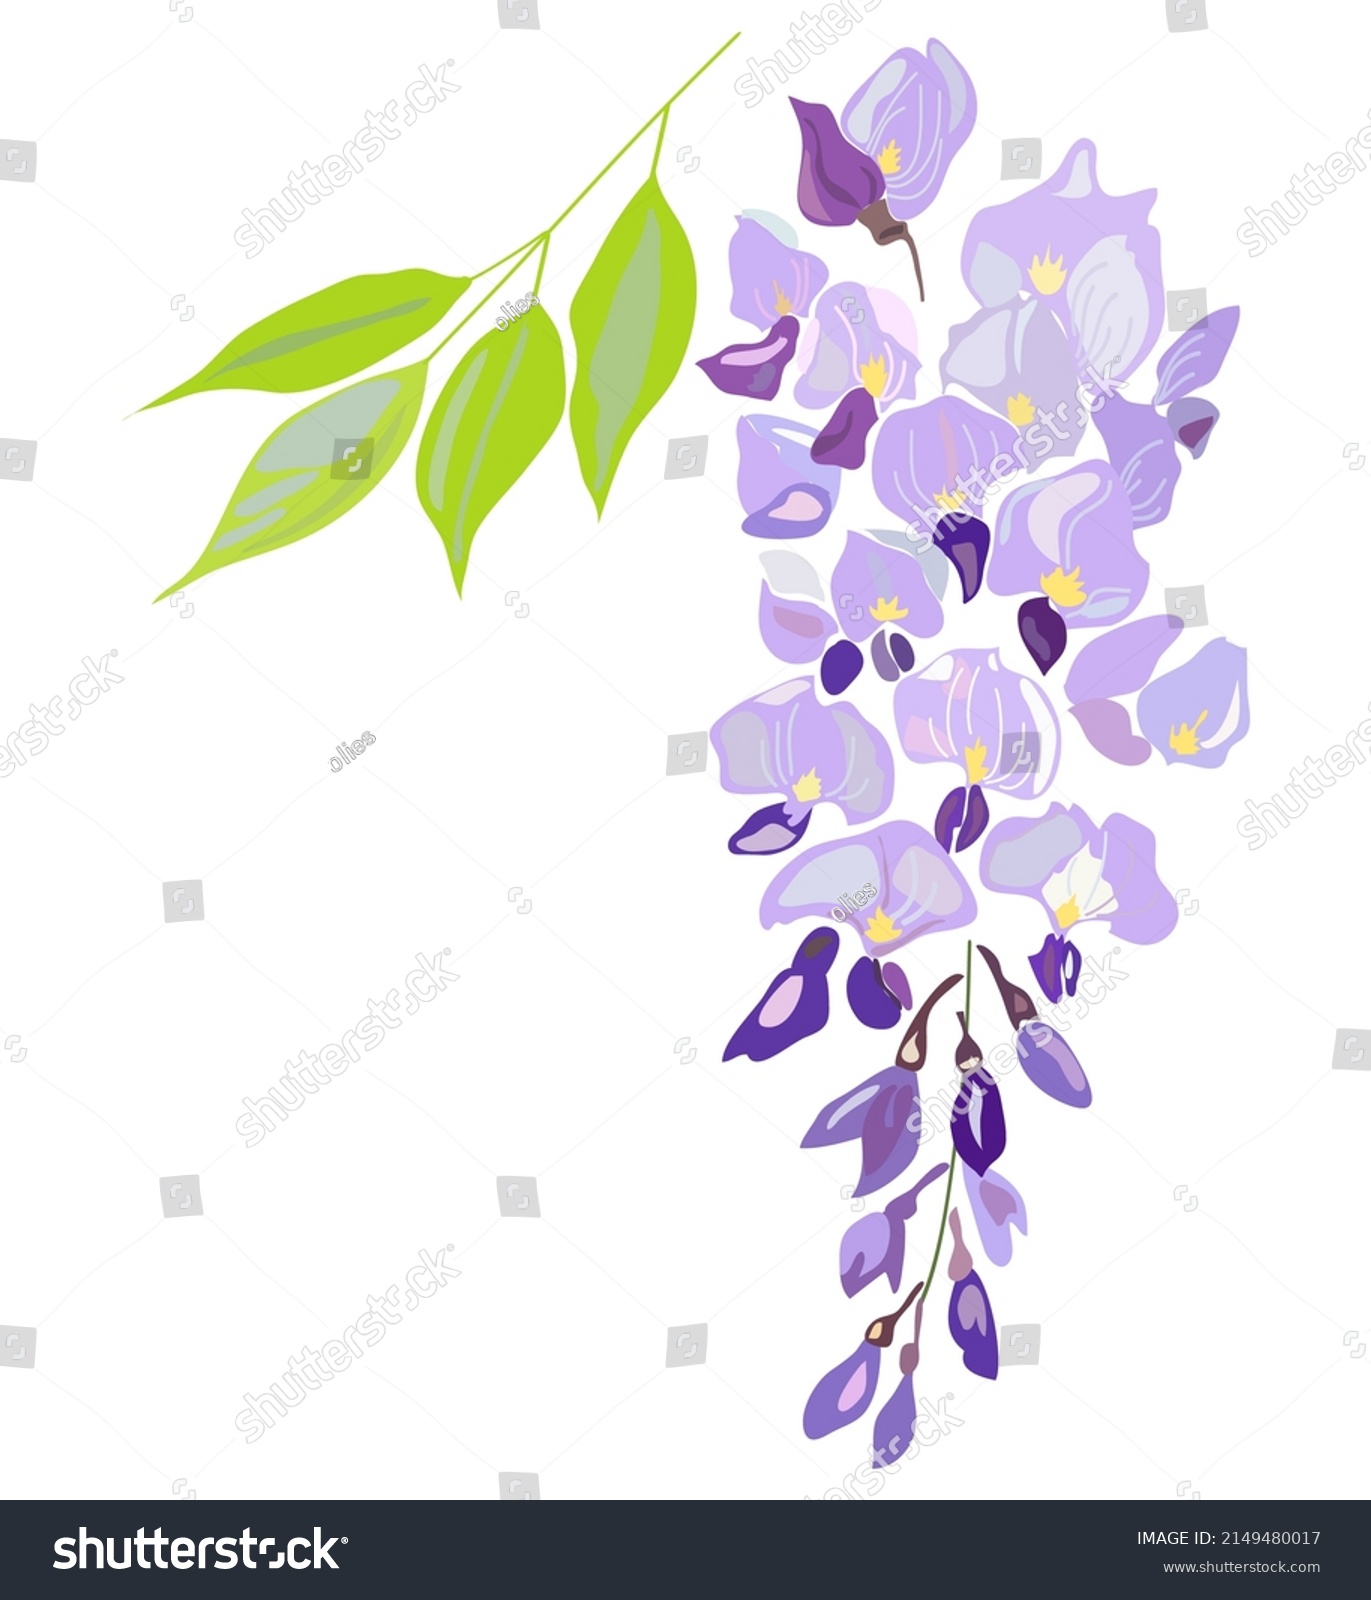 SVG of Illustration of wisteria blooms in spring.Chinese wisteria. Hand drawn botanical vector illustration svg